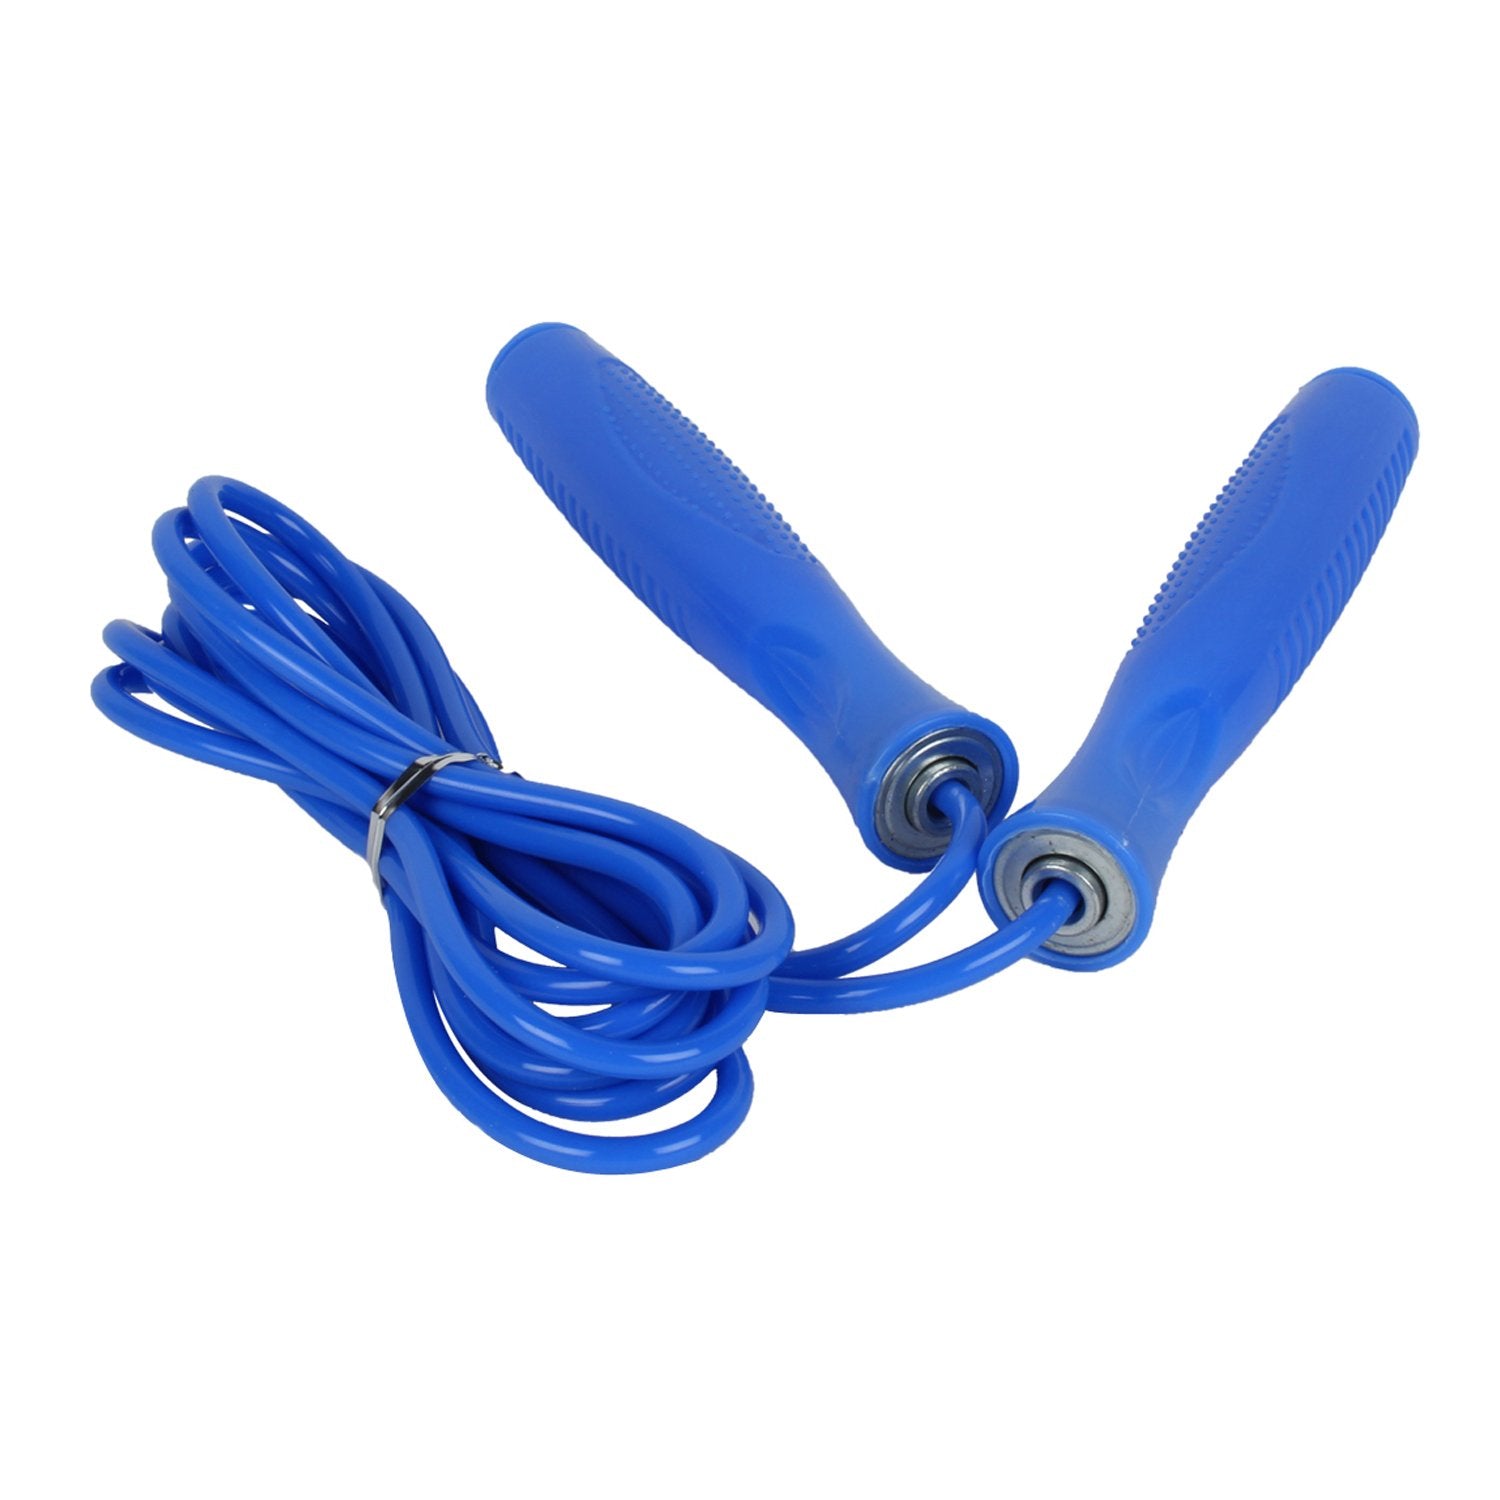 Strauss Solo Jump Rope (Blue)